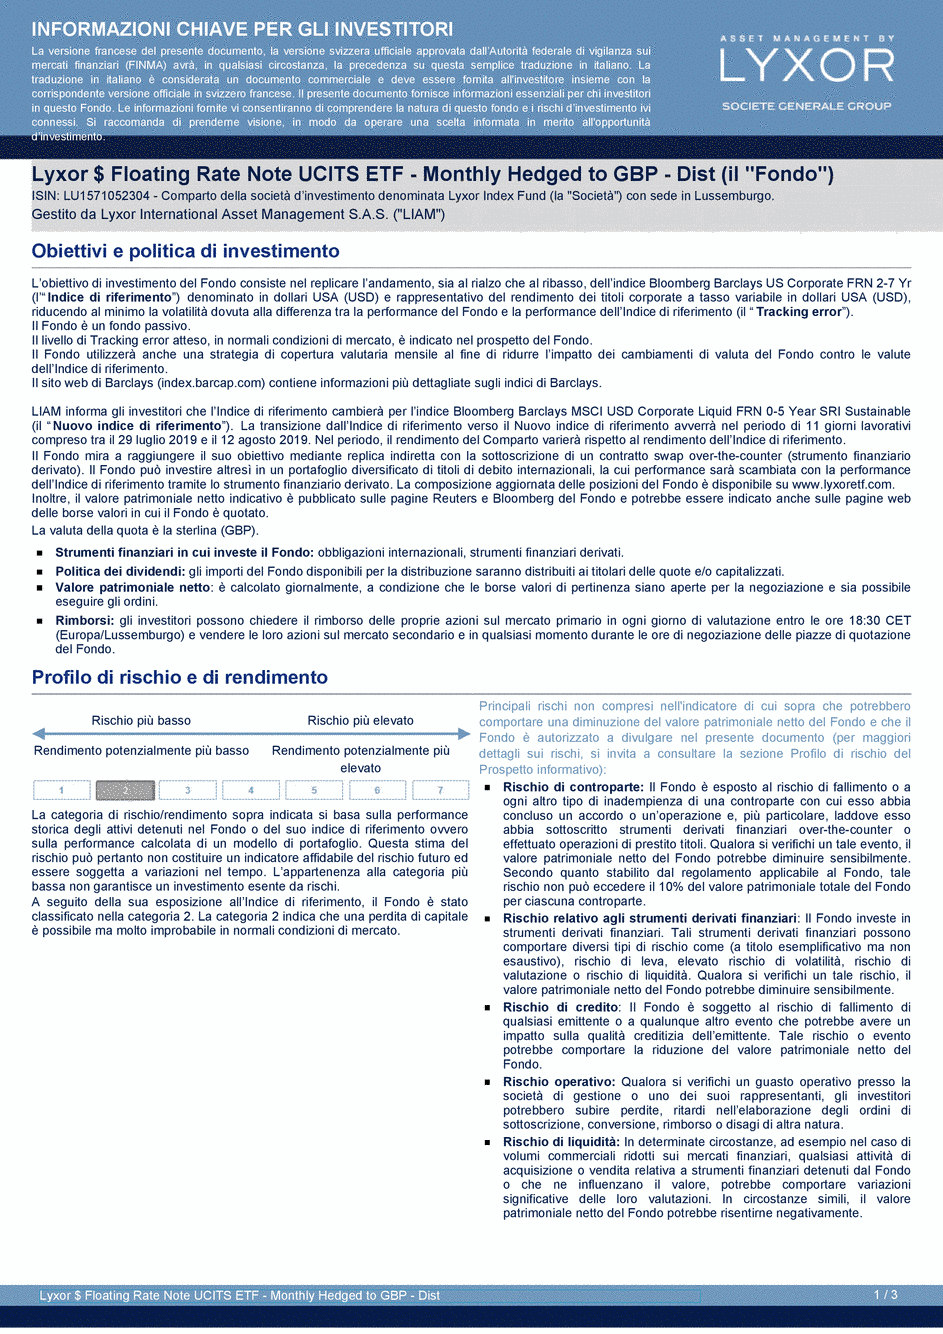 DICI Lyxor $ Floating Rate Note UCITS ETF - Monthly Hedged to GBP - Dist - 29/07/2019 - Italien